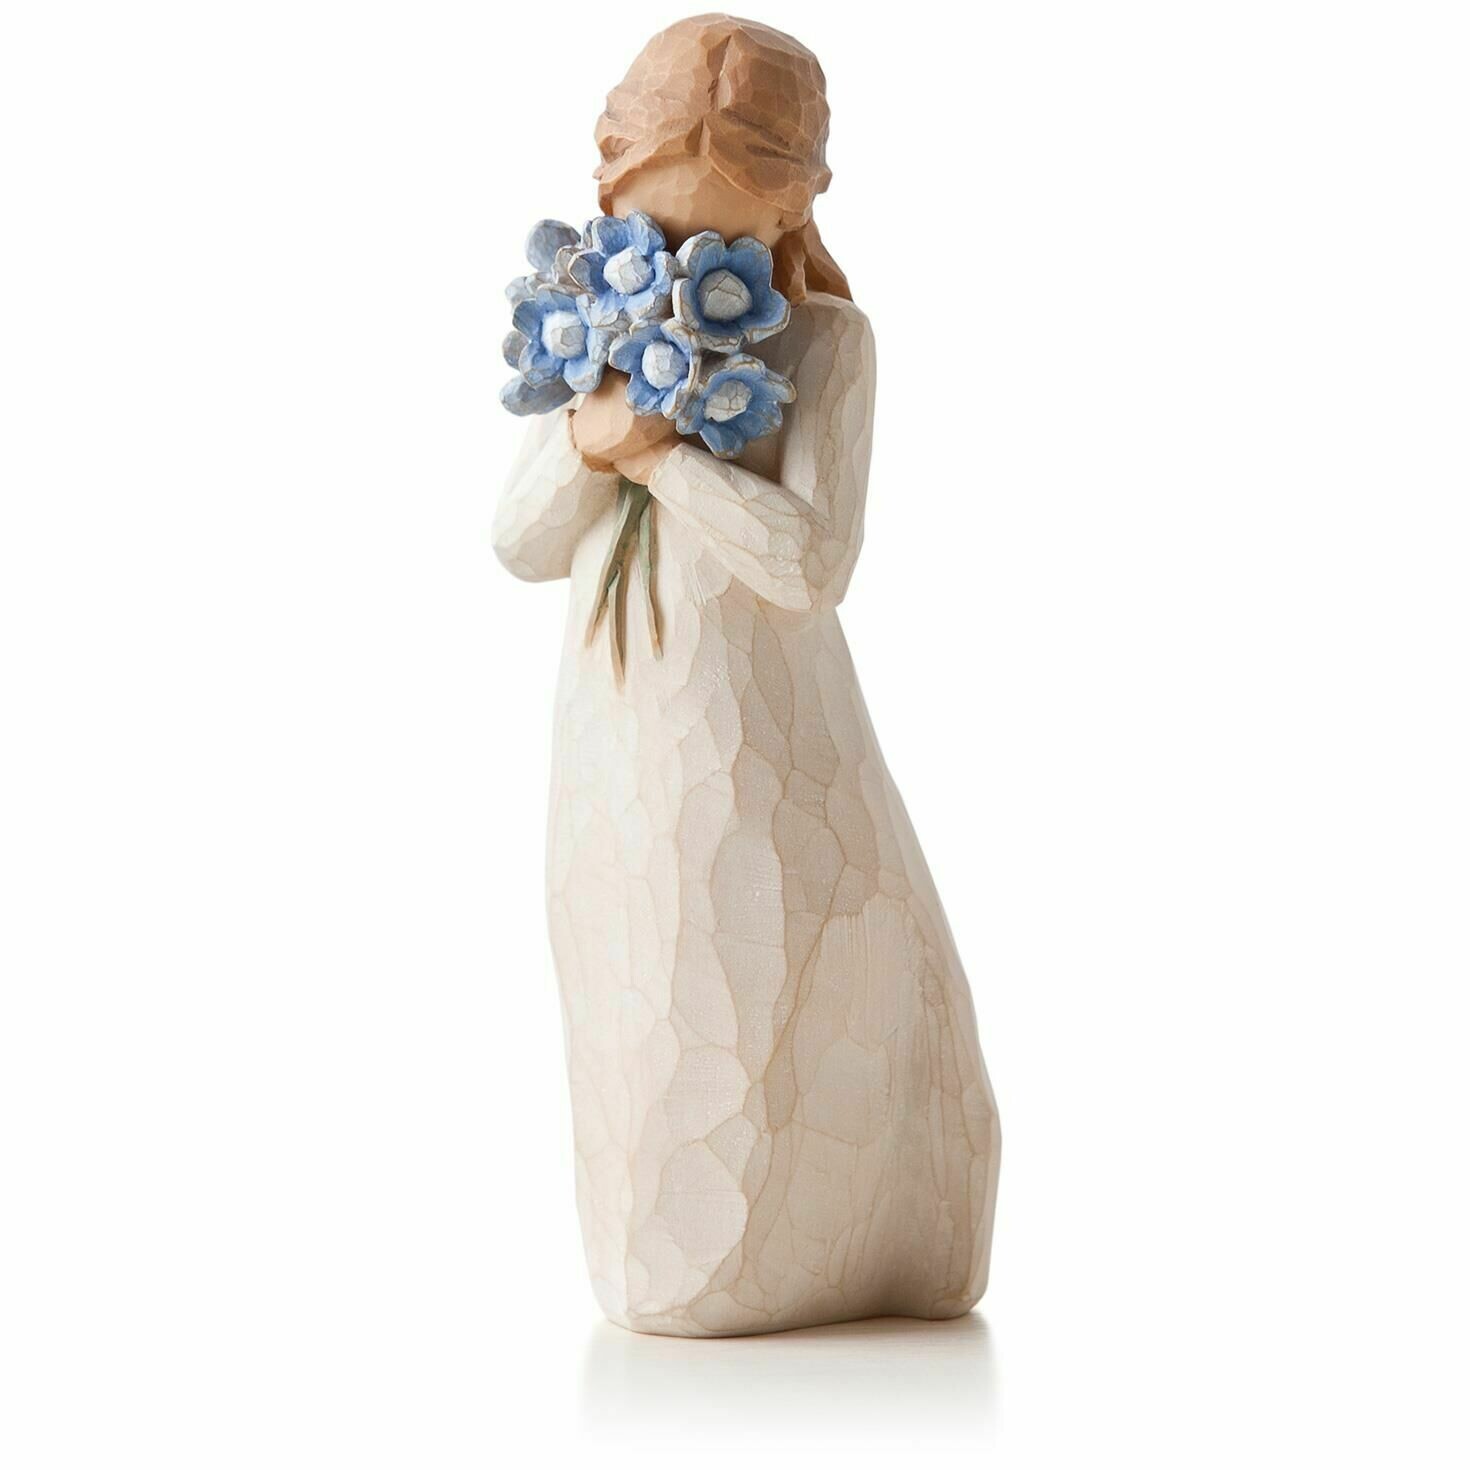 Willow Tree: Forget me not - Girl holding blue flowers